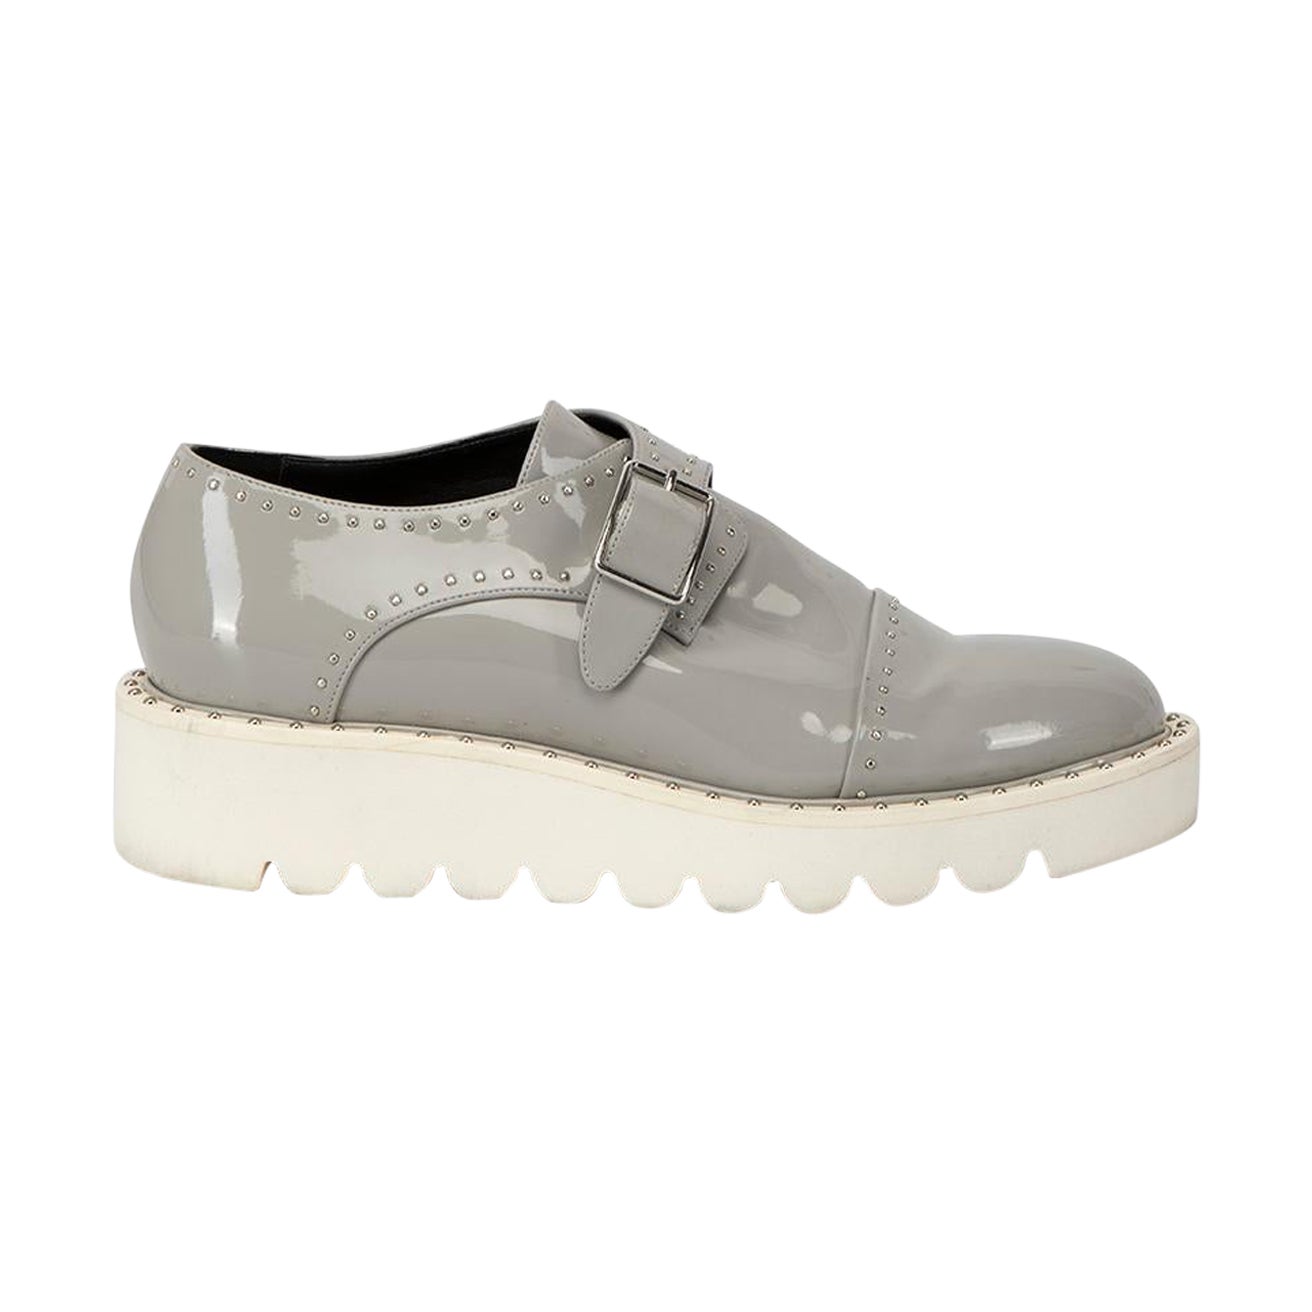 Grey Vegan Patent Leather Studded Platform Trainers Size IT 37 For Sale